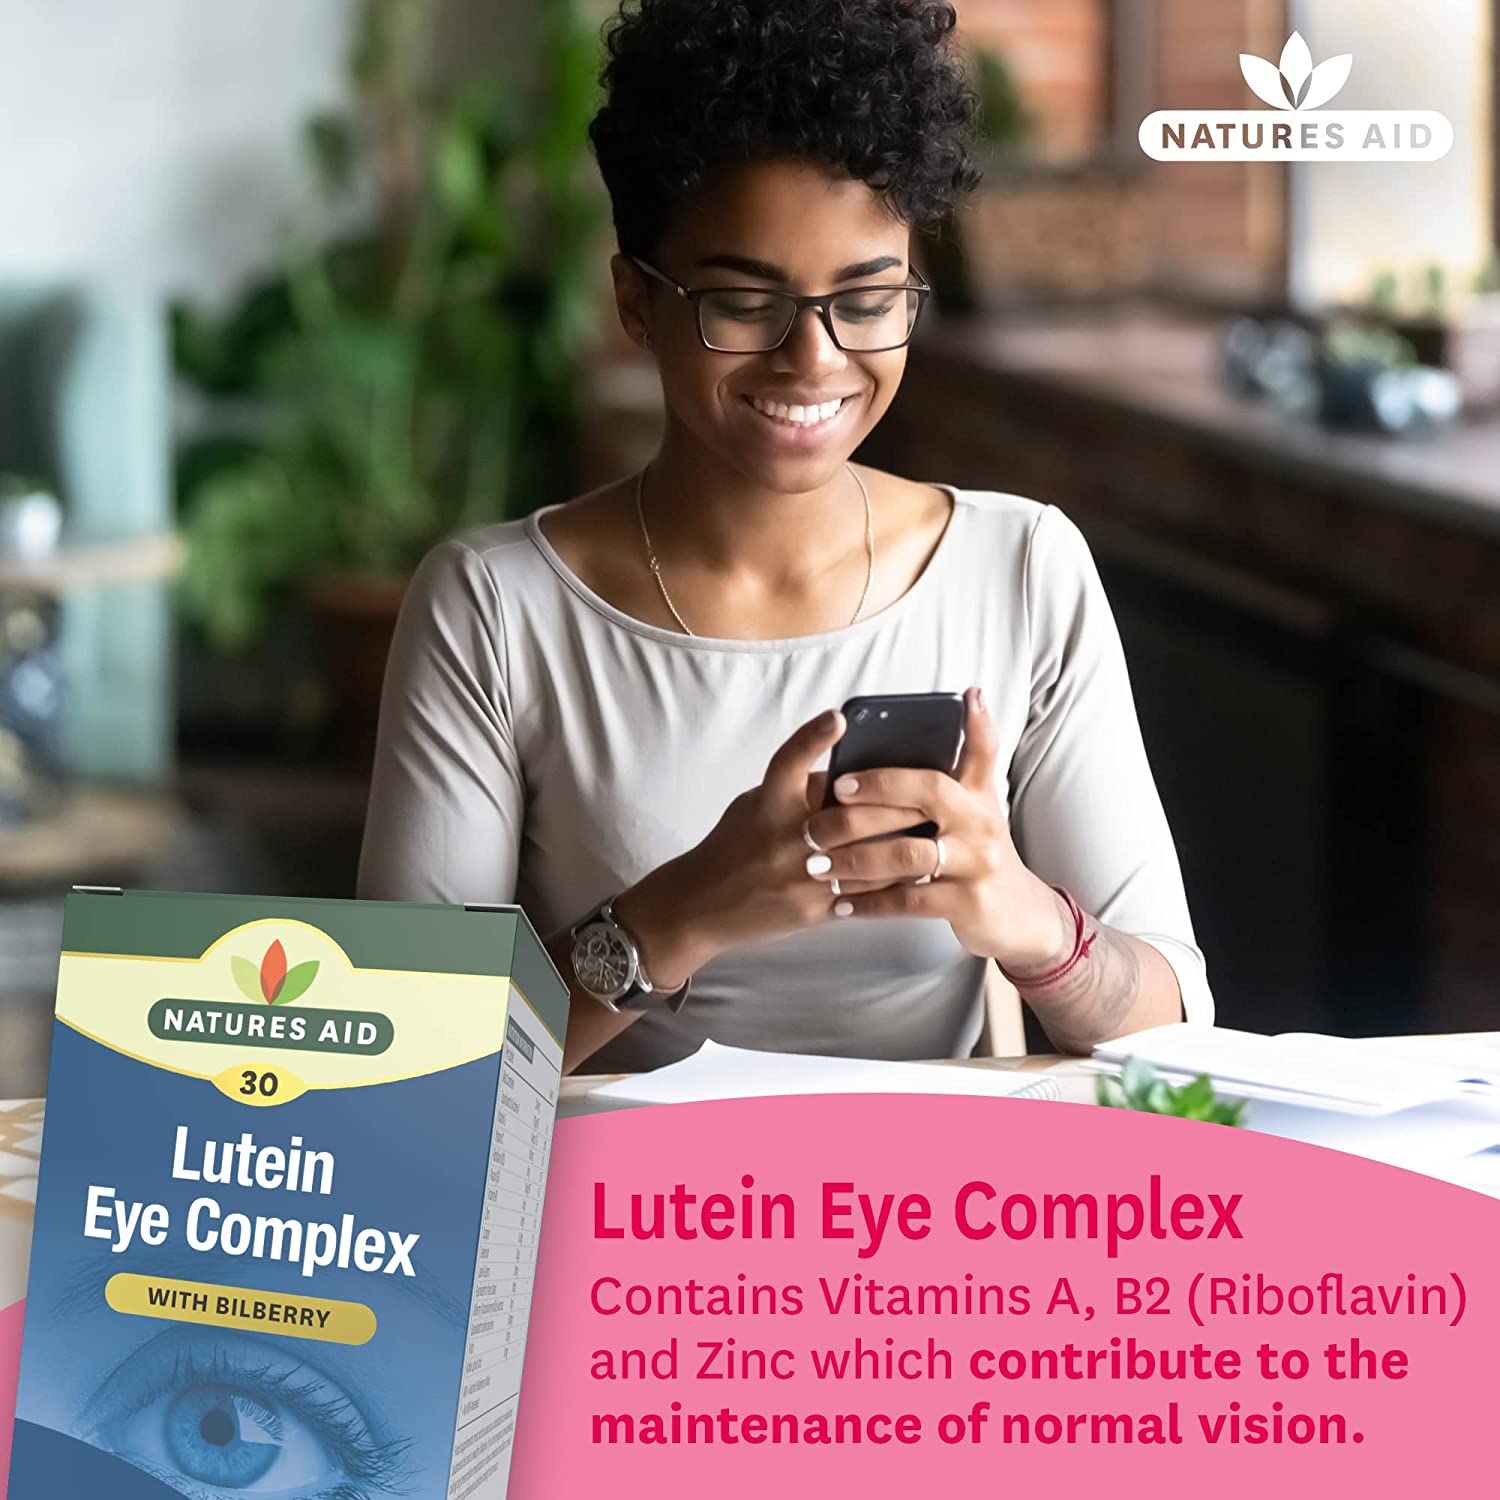 Lutein Eye Complex with Bilberry 30 Tablets